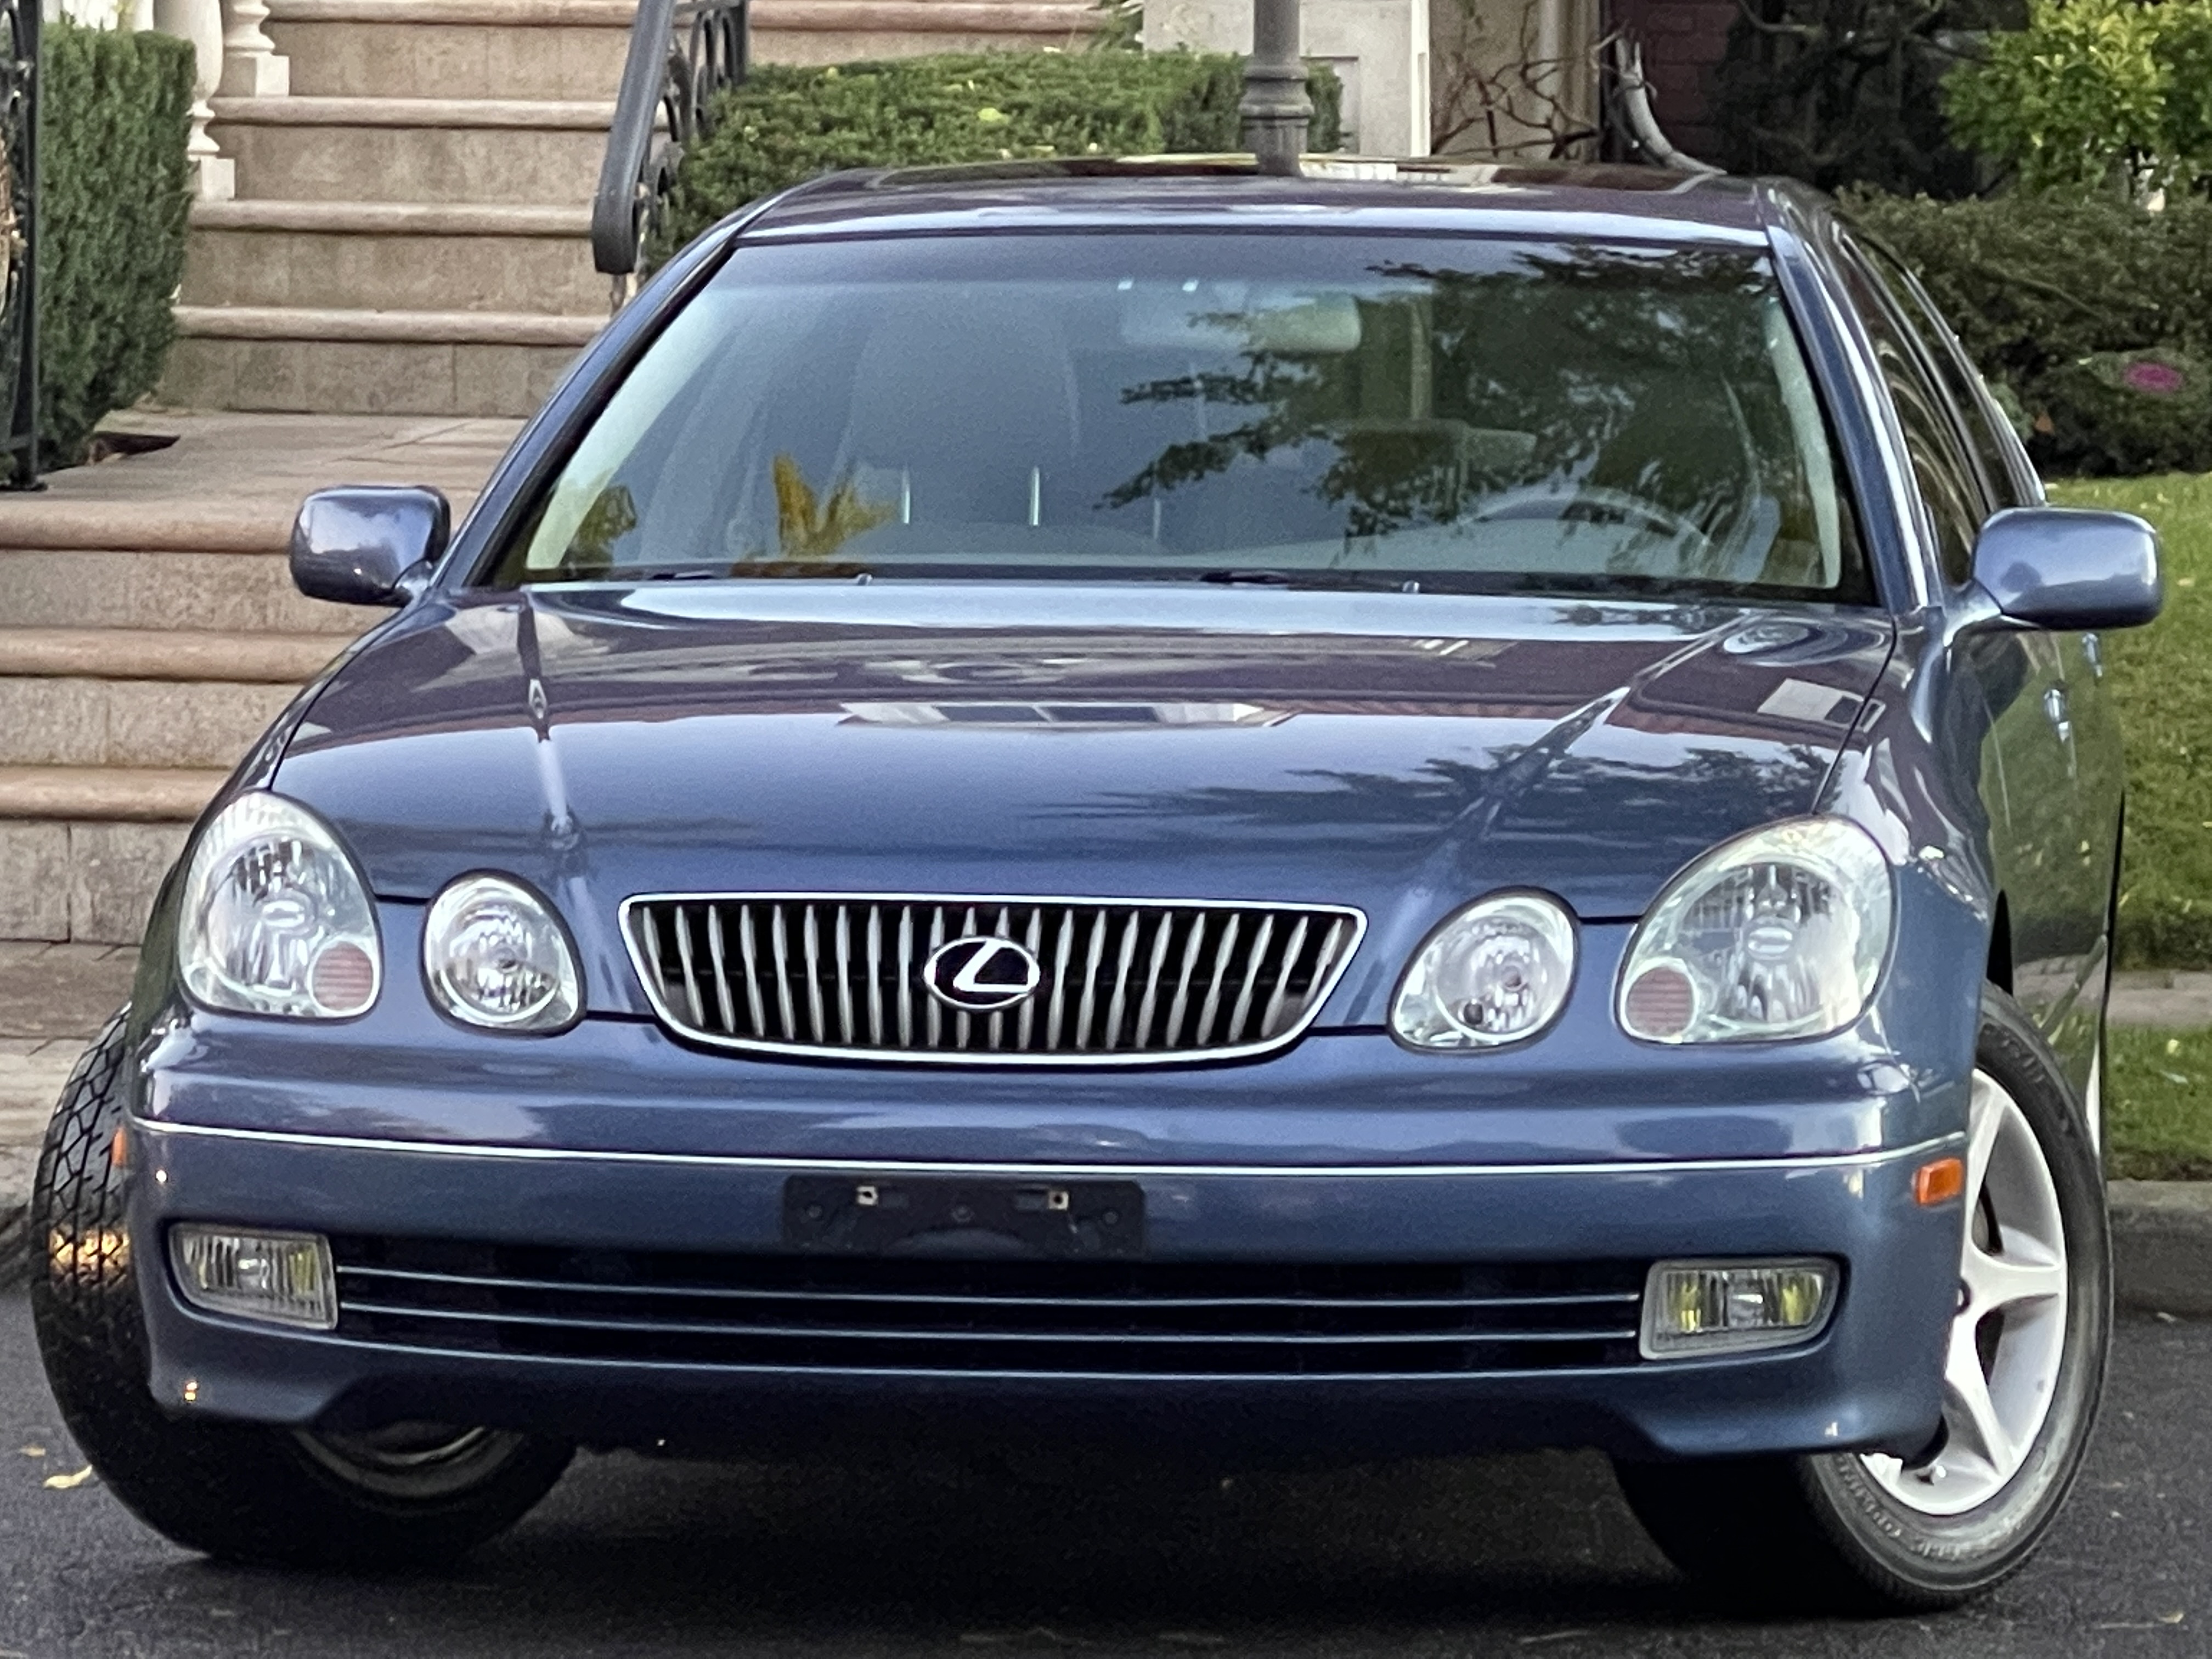 Buy Used 2003 LEXUS GS300 for $9 900 from trusted dealer in Brooklyn, NY!